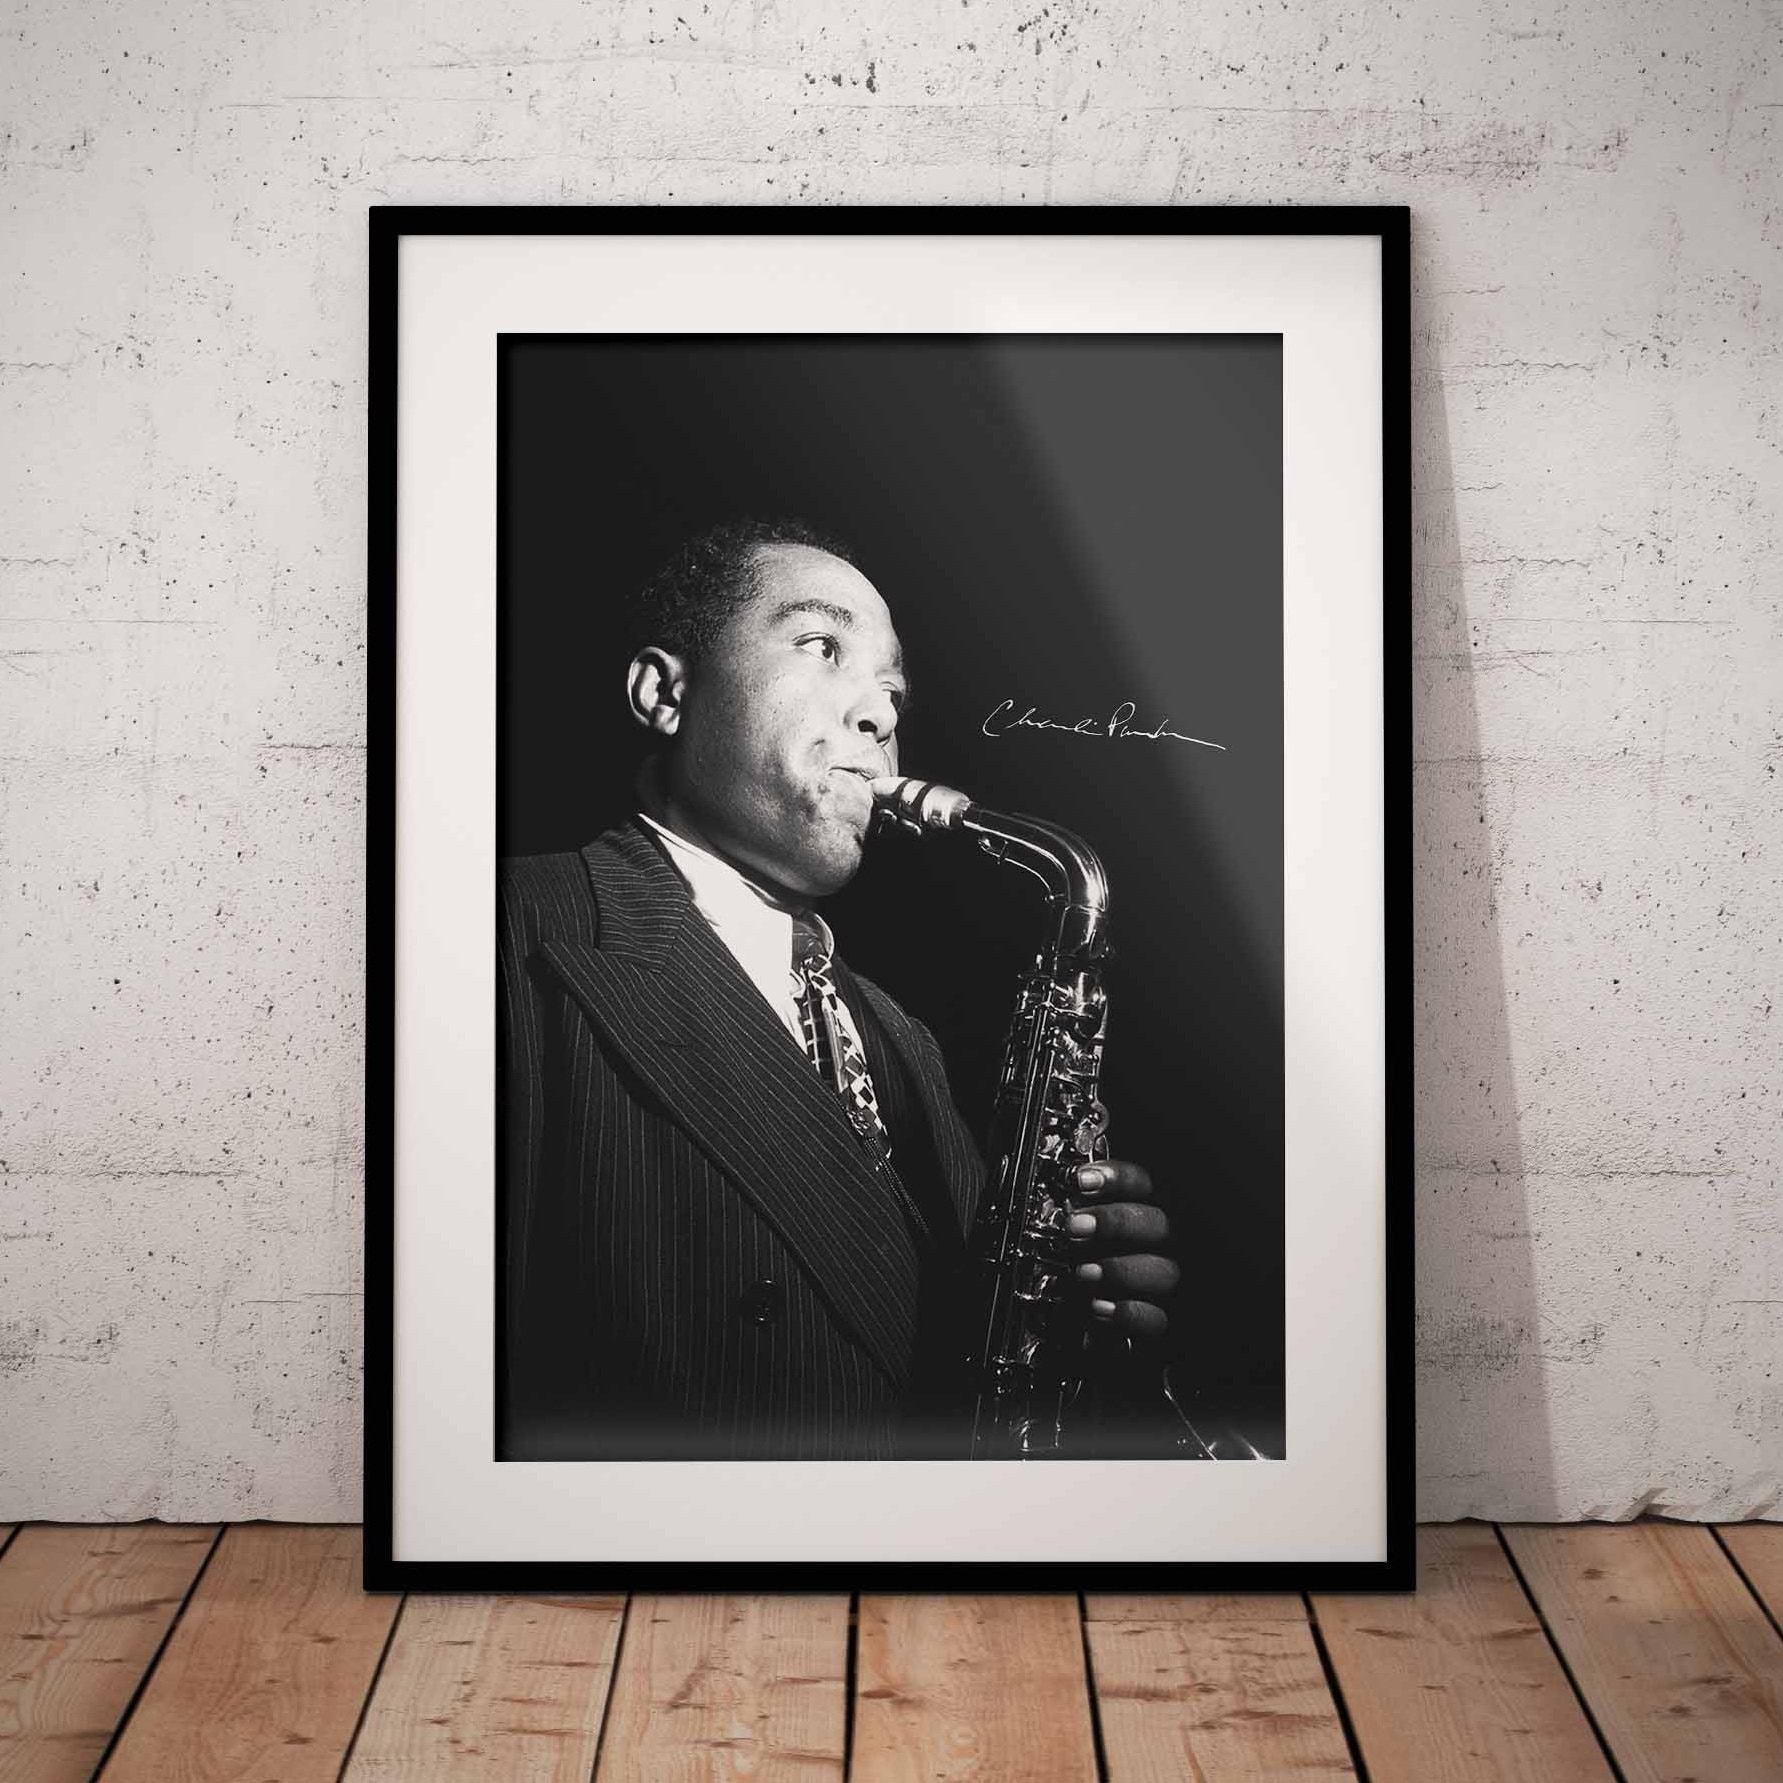 Alto saxophone owned and played by Charlie Parker